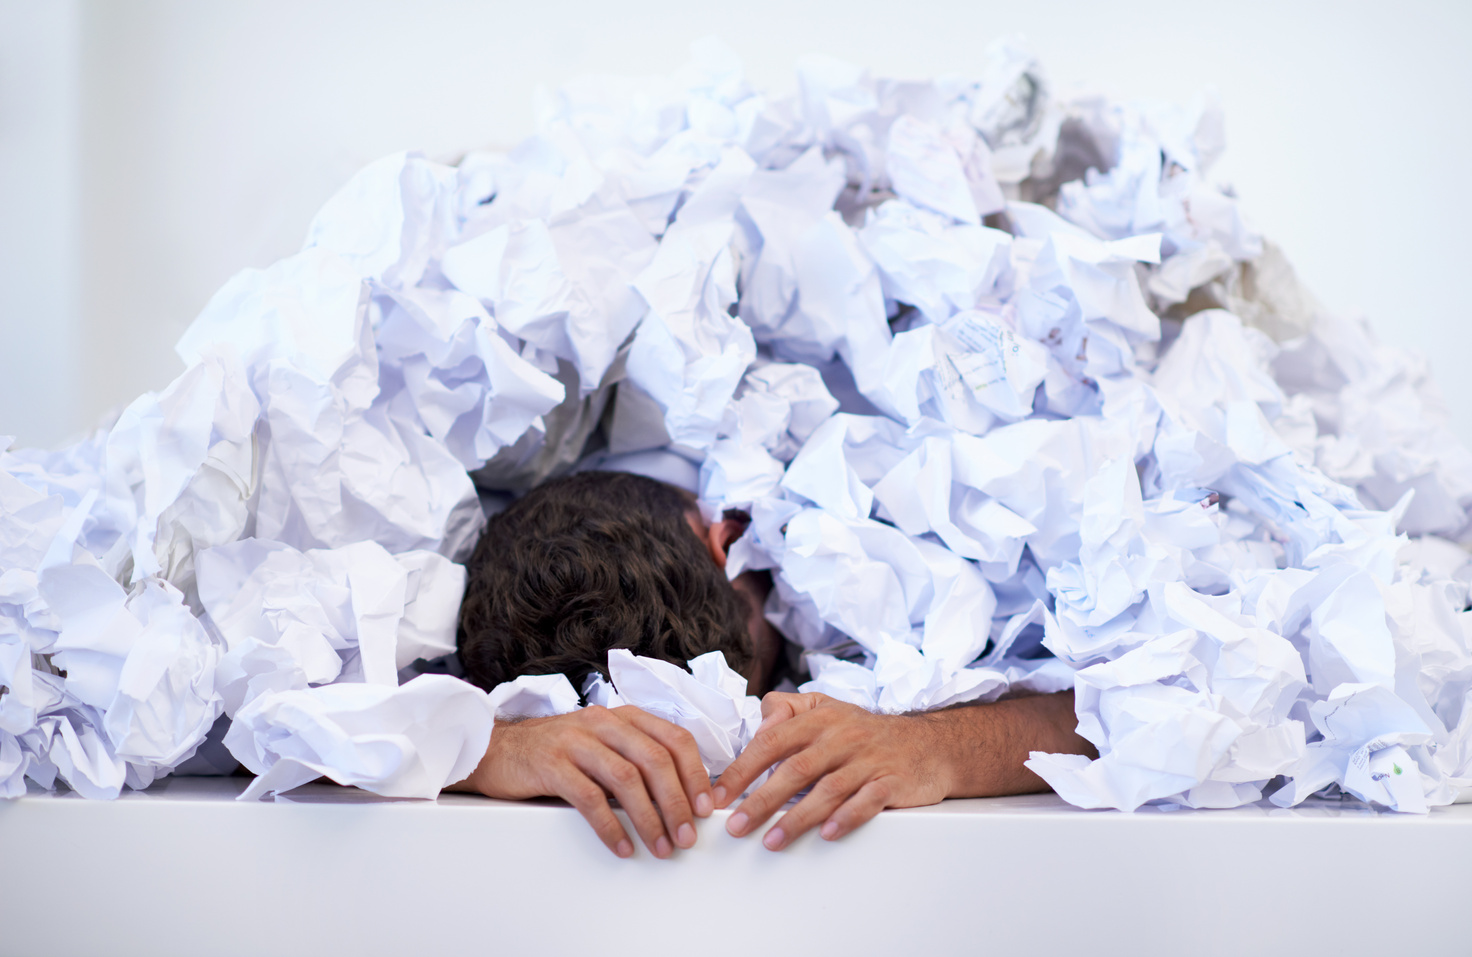 The paperwork's piling up